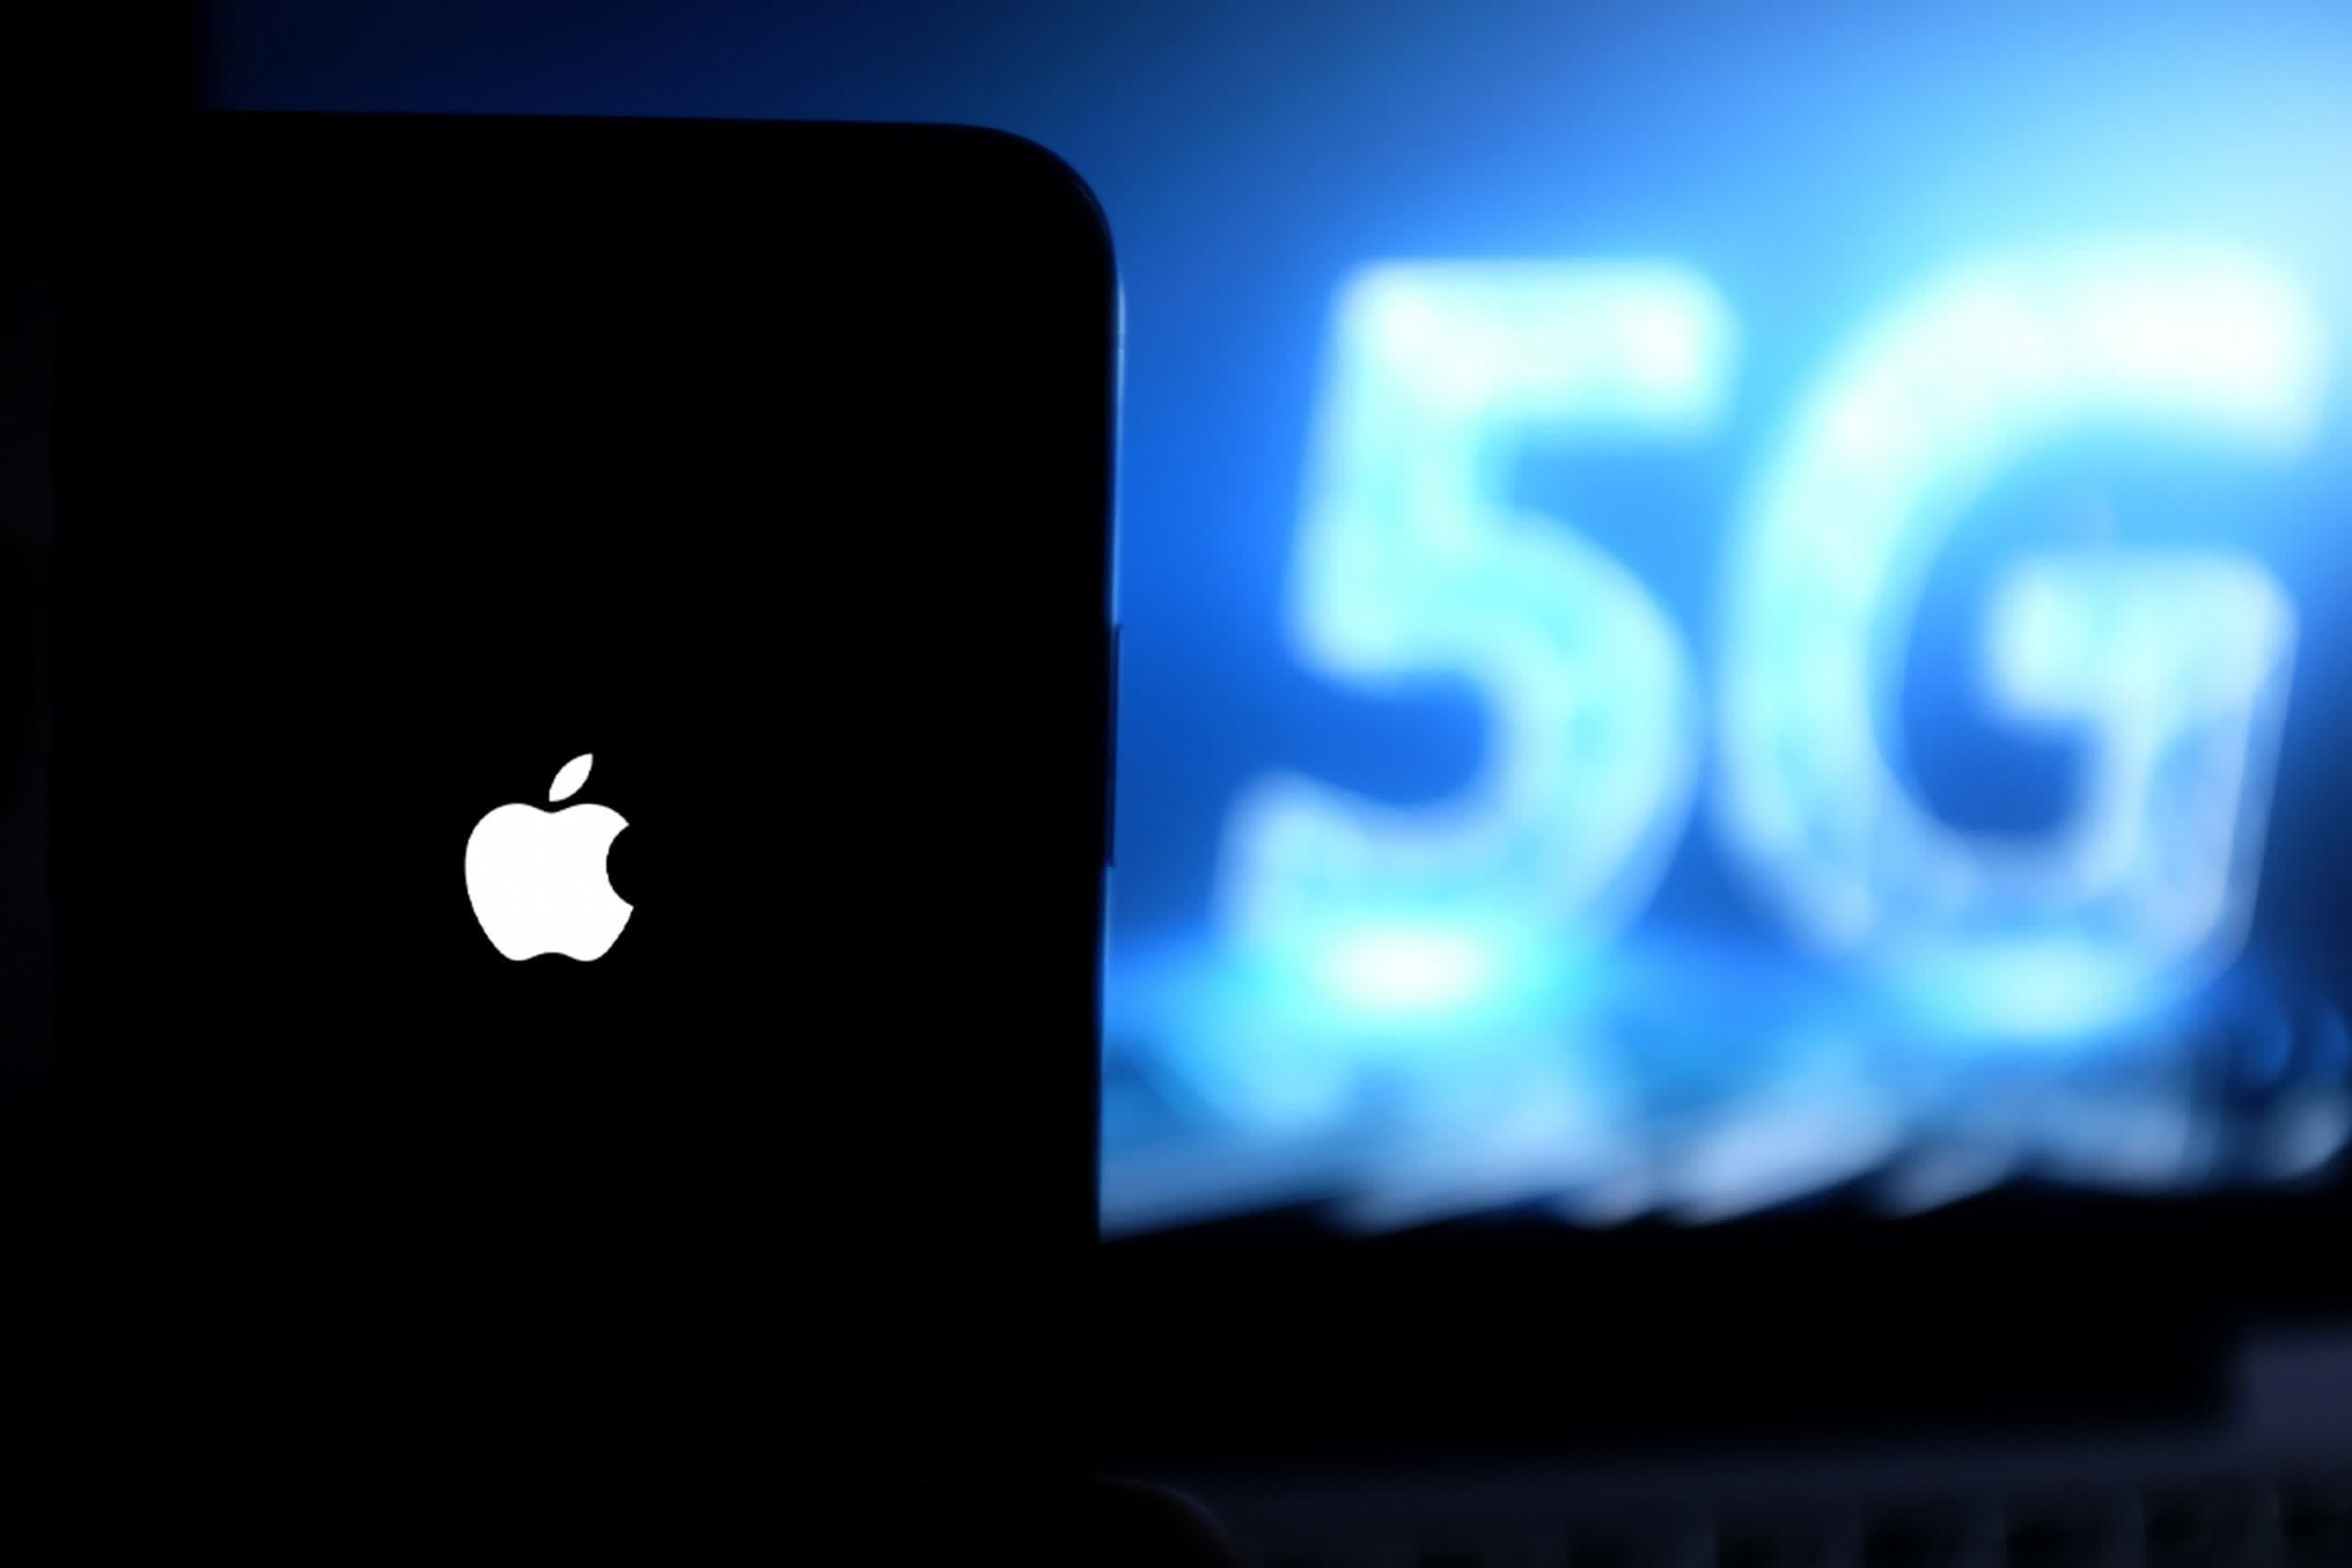 Apple is assembling a new team to bring more wireless chips in-house